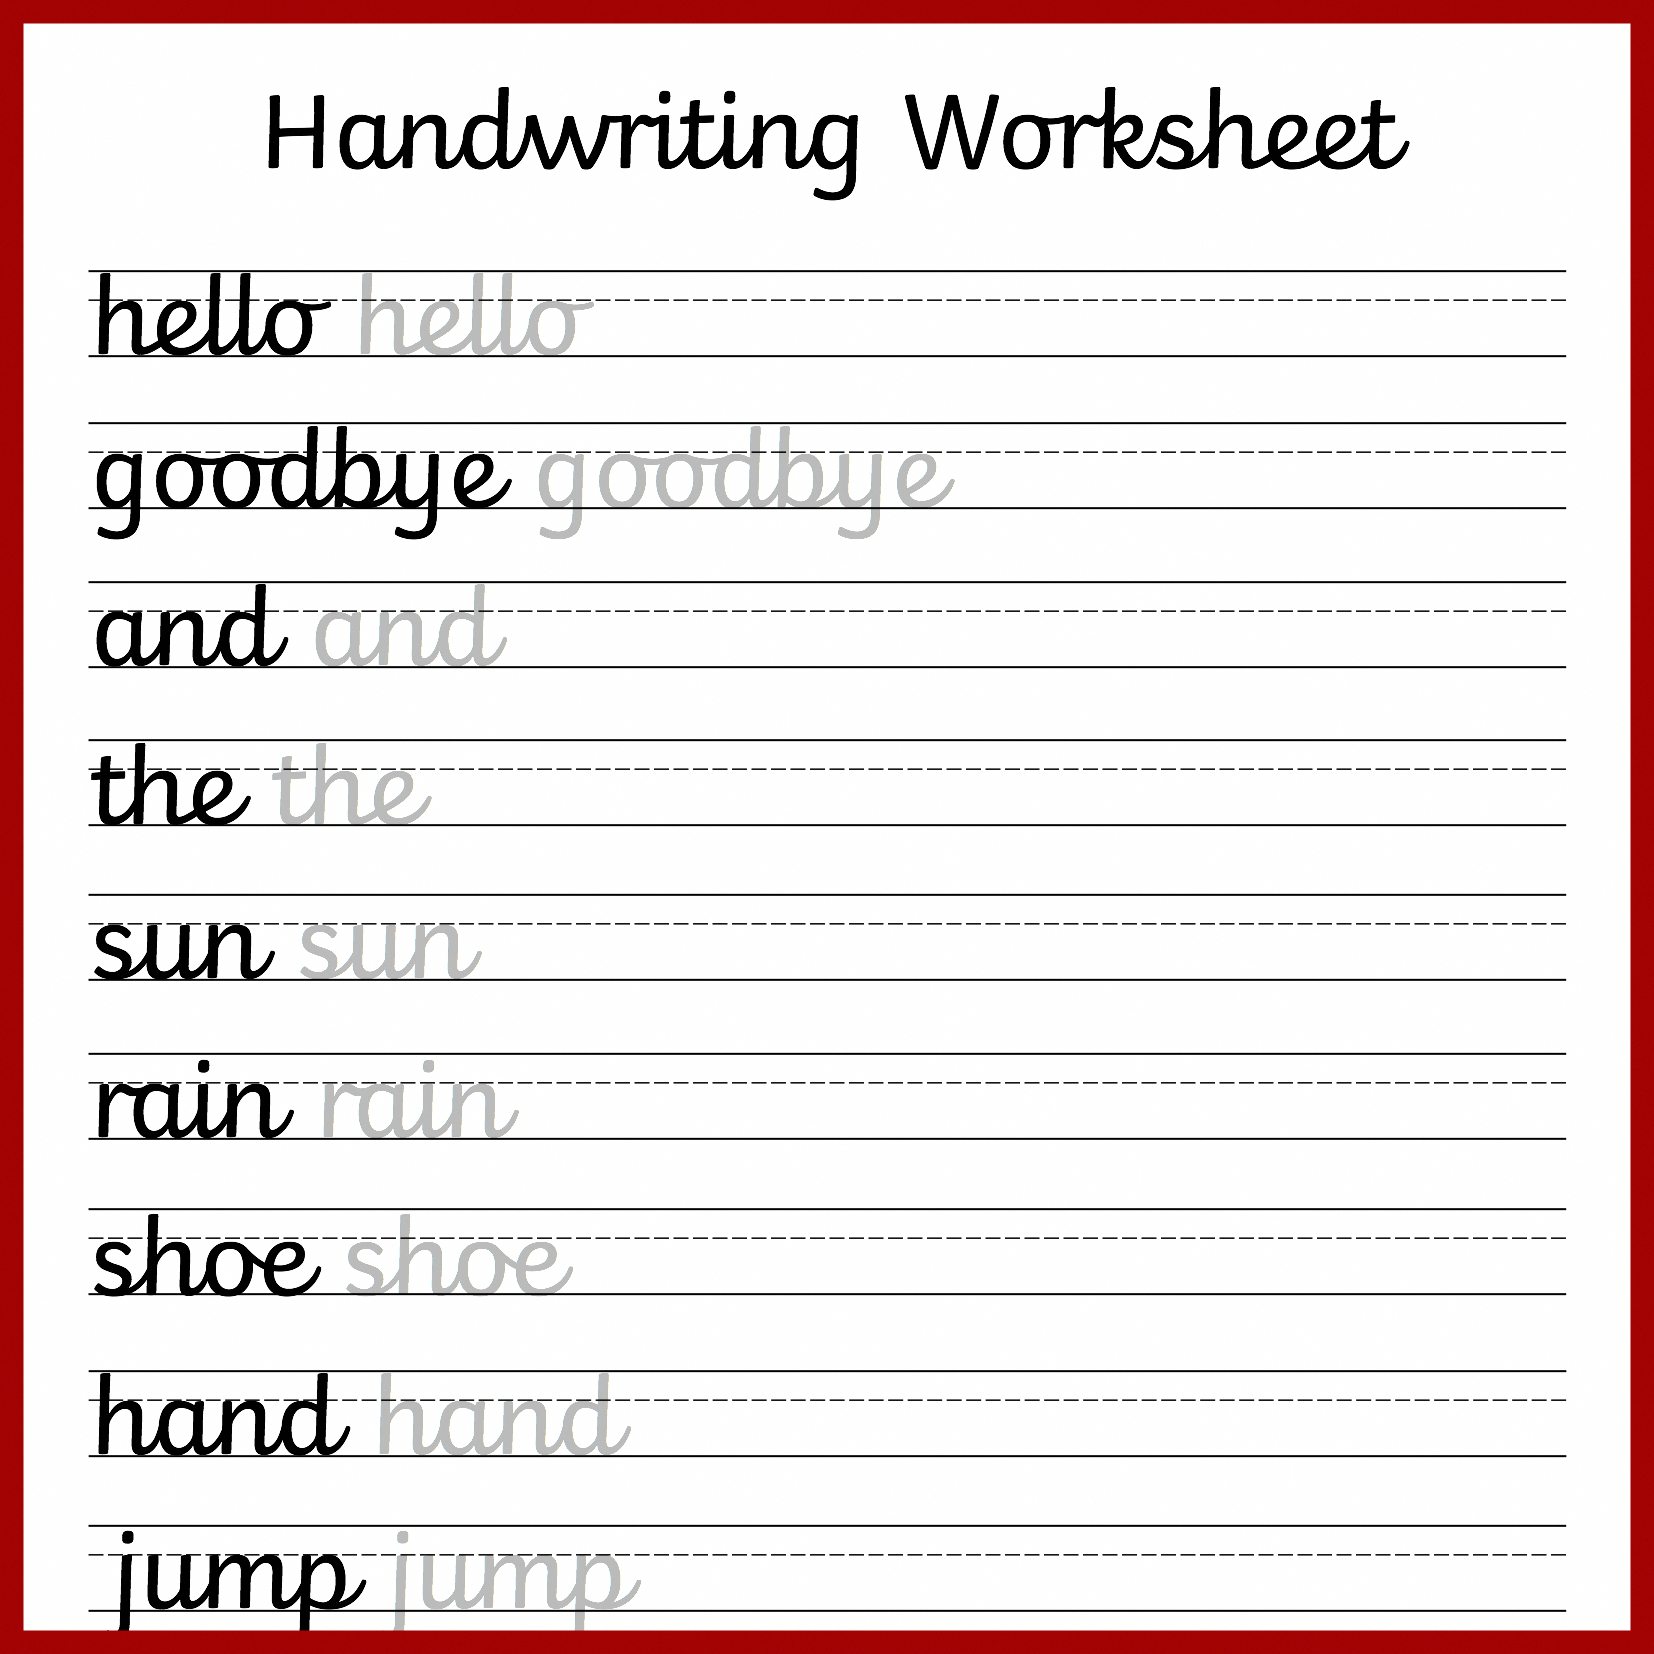 Worksheets : Follow Recent Post Sharing Some Non Cursive